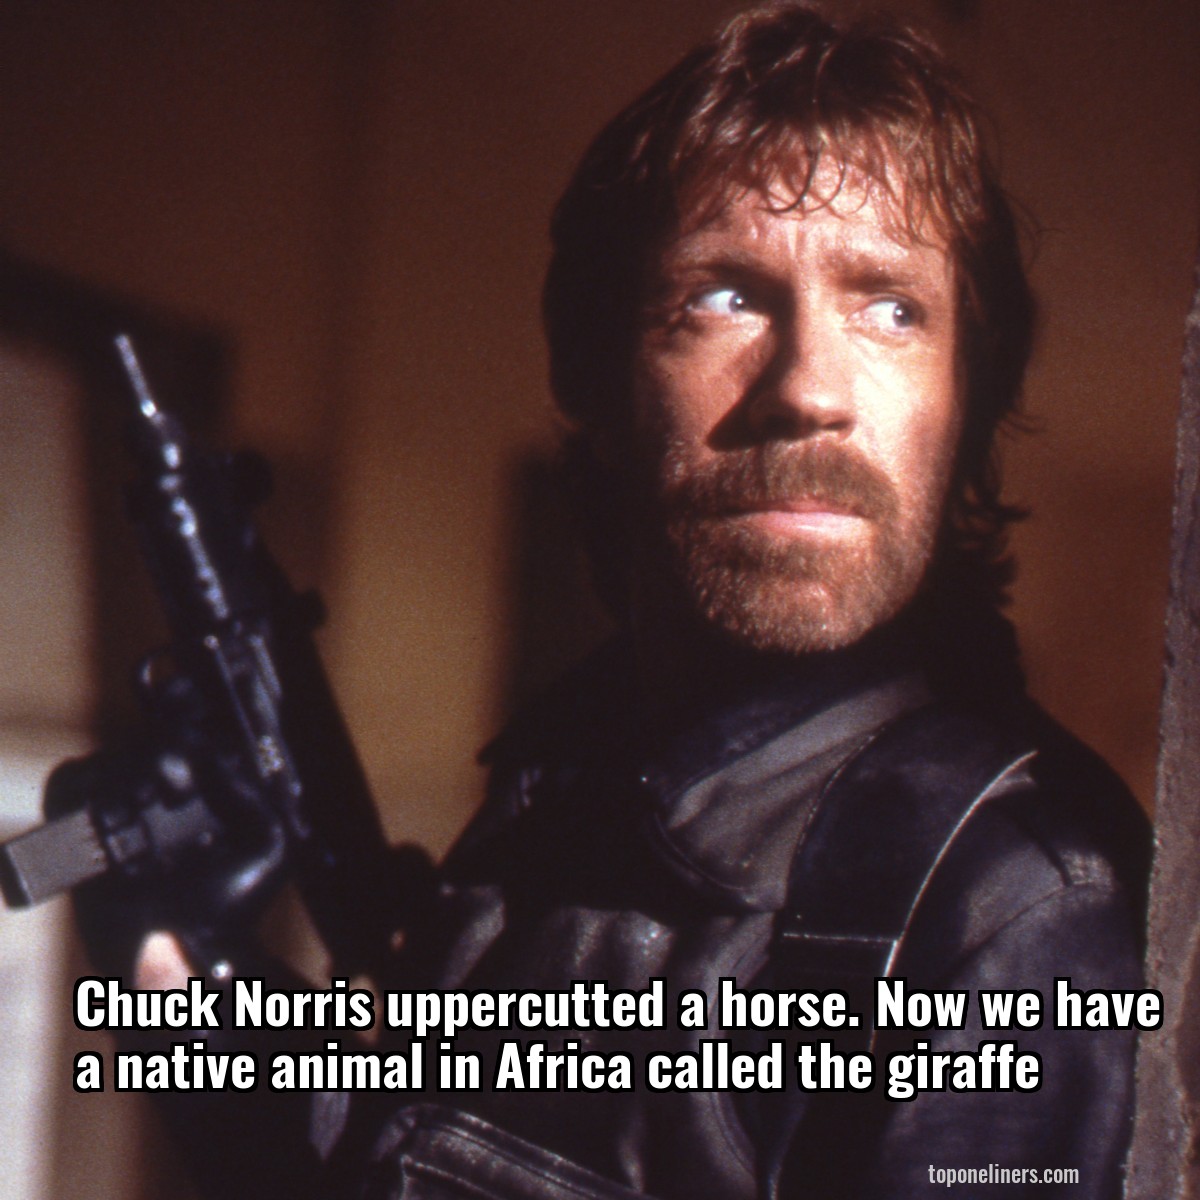 Chuck Norris uppercutted a horse. Now we have a native animal in Africa called the giraffe